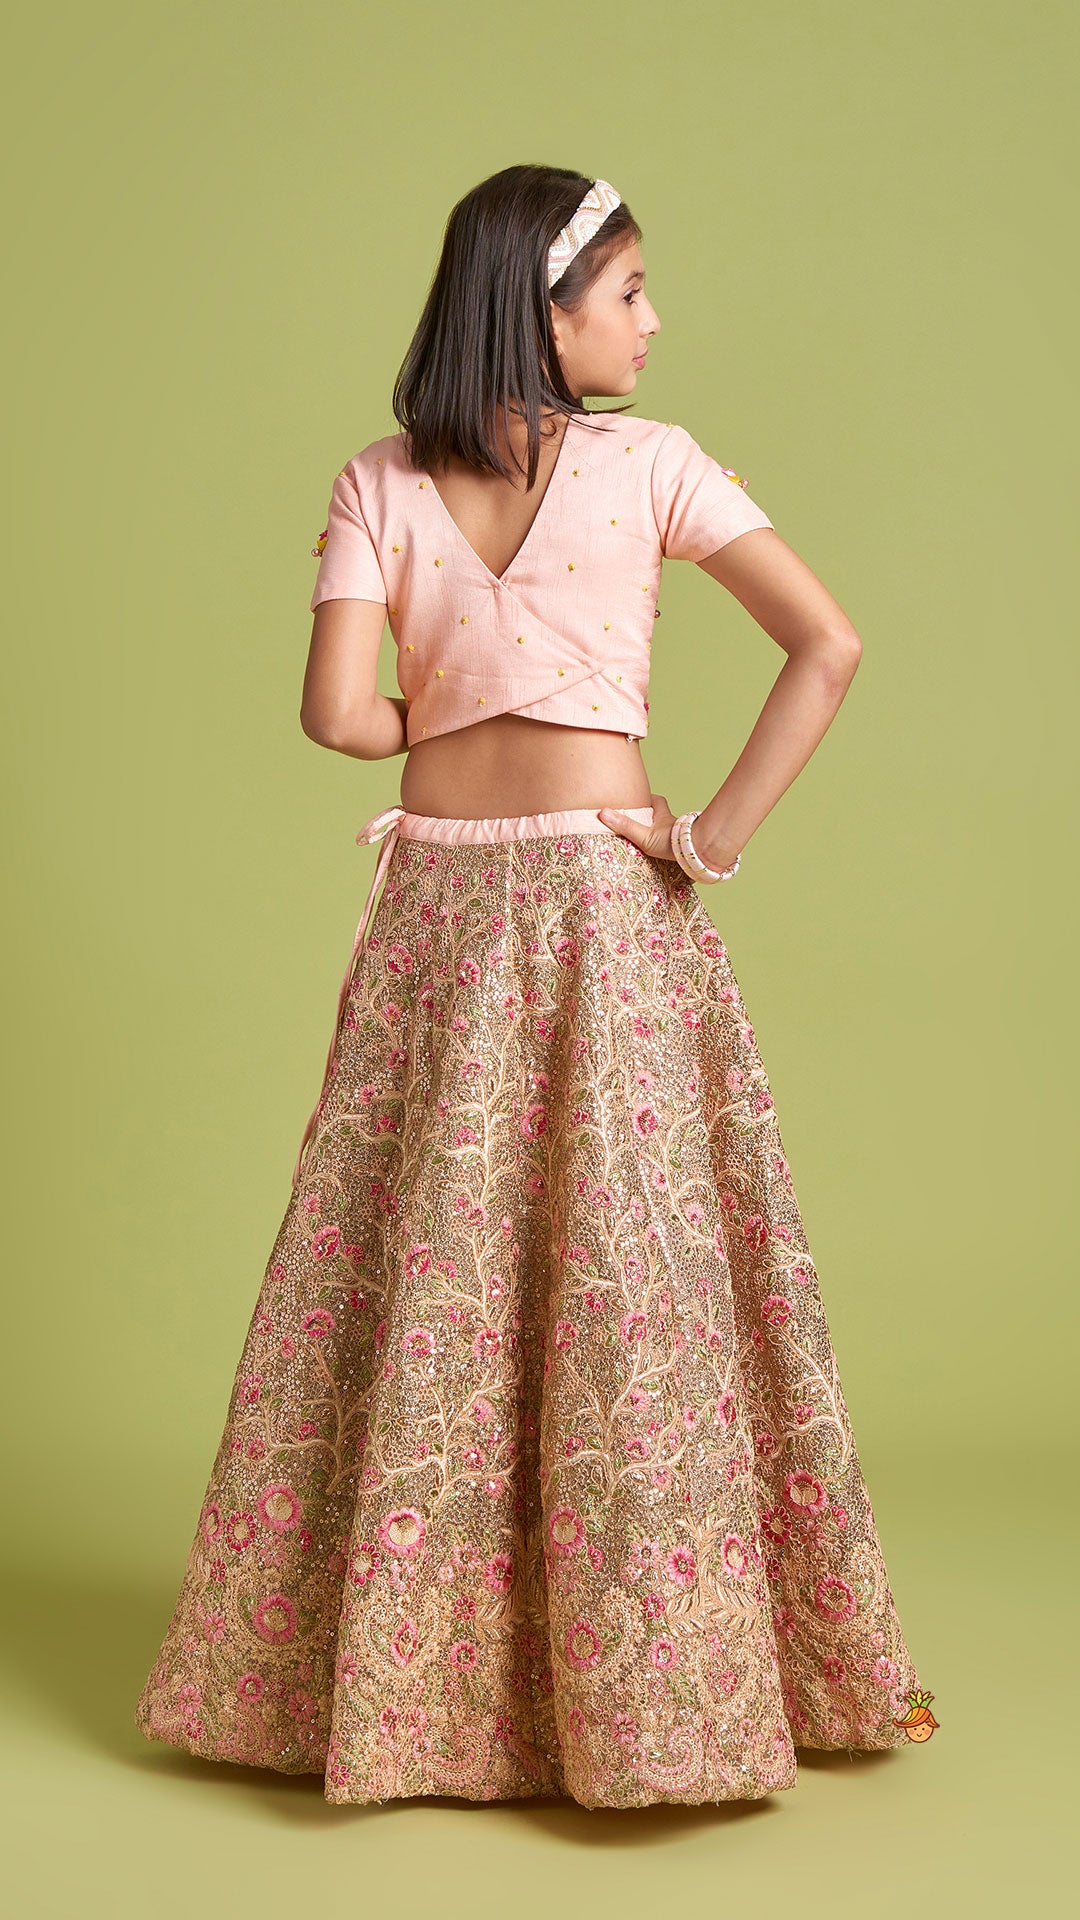 Pre Order: Peach Cap Sleeves Top And Heavy Embroidered Lehenga